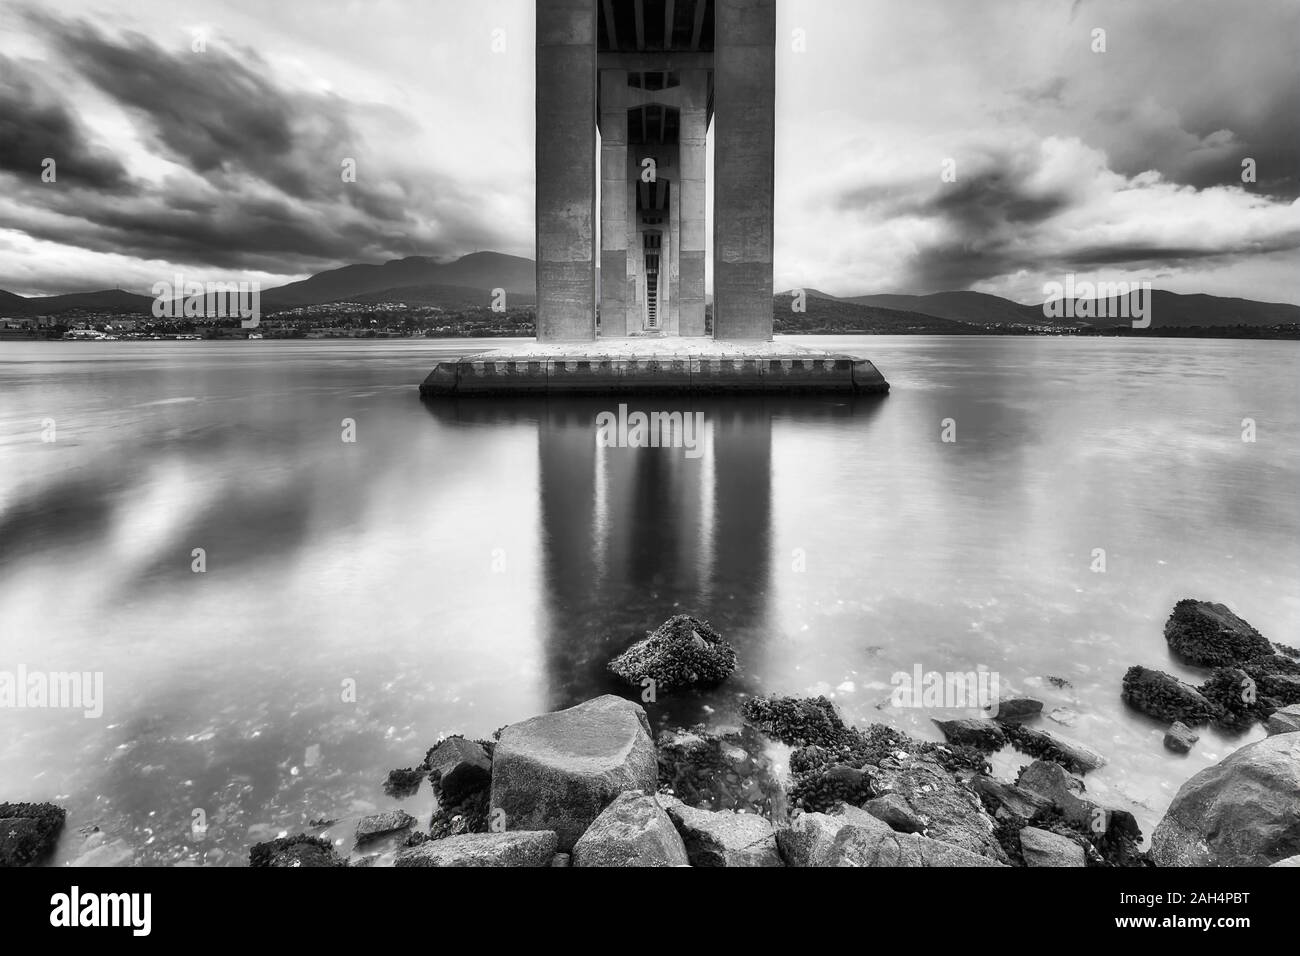 High contrast black white view from underneath the Tasman bridge across Derwent river in Hobart at sunrise when clouds reflect in still waters. Stock Photo